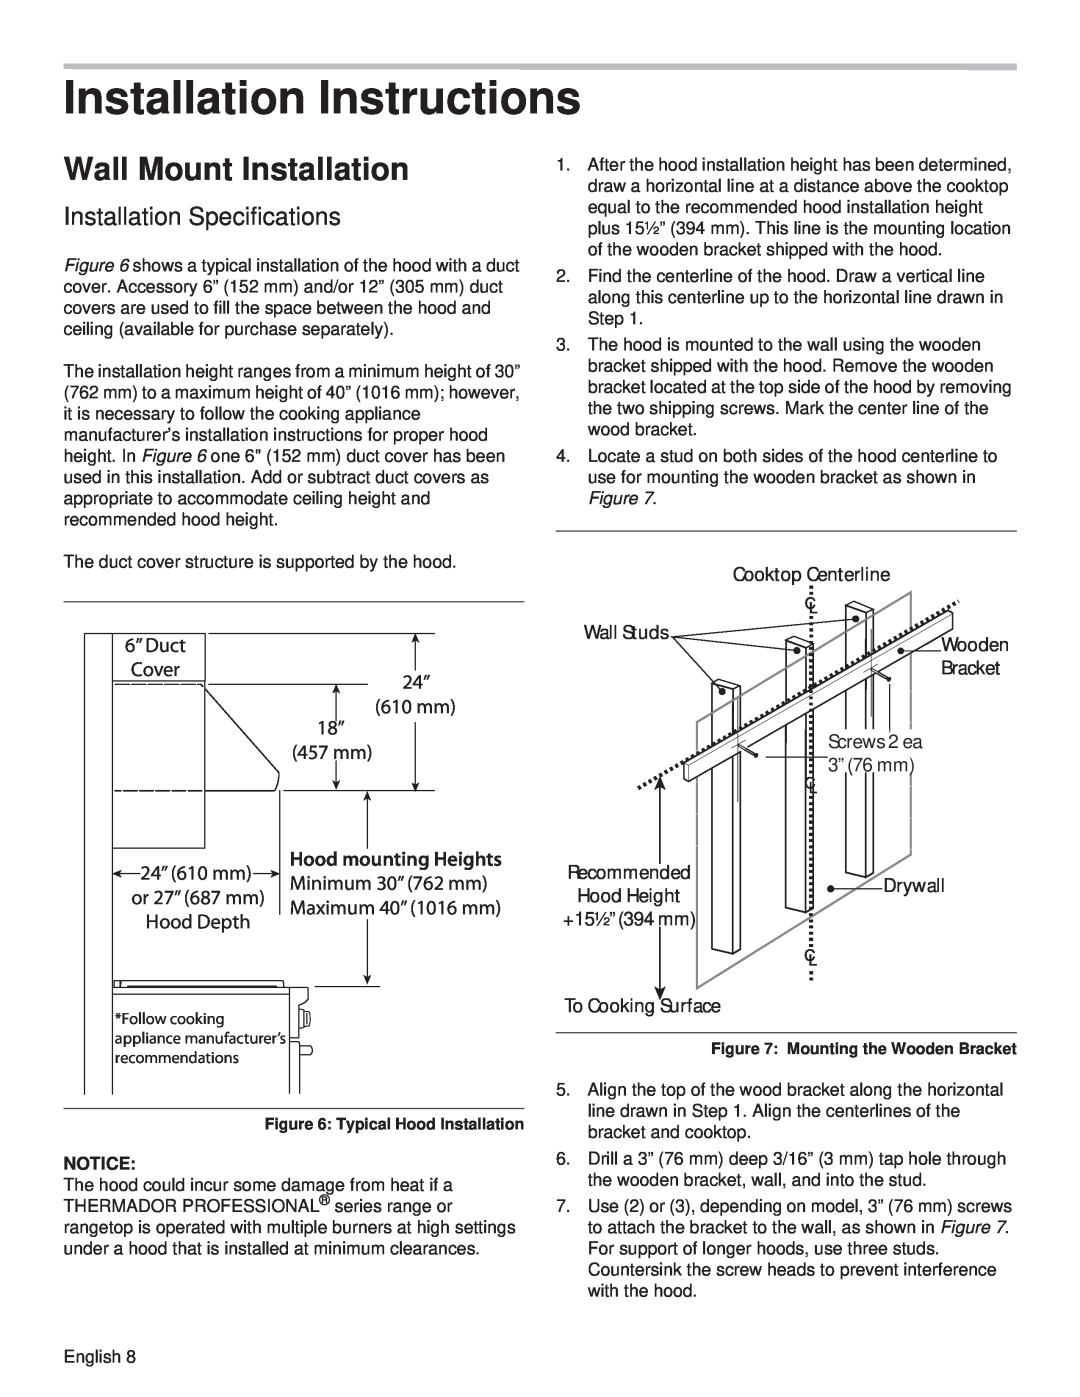 Thermador PH42GS Installation Instructions, Wall Mount Installation, 6” Duct Cover 24” 610 mm 18” 457 mm, Hood Depth 